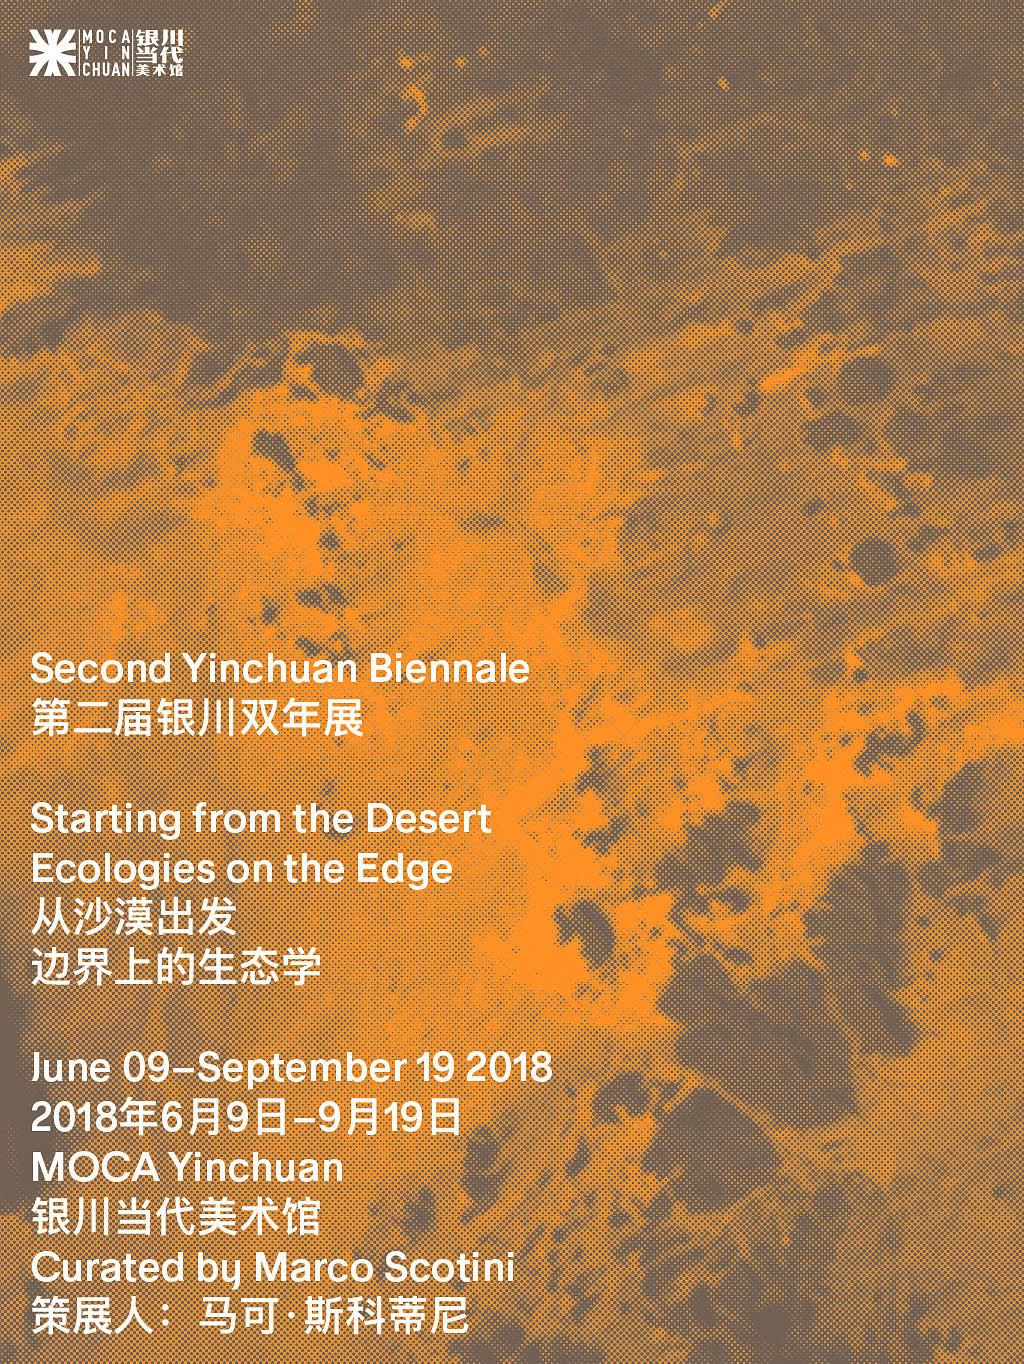 MOUSSE AGENCY THE SECOND YINCHUAN BIENNALE